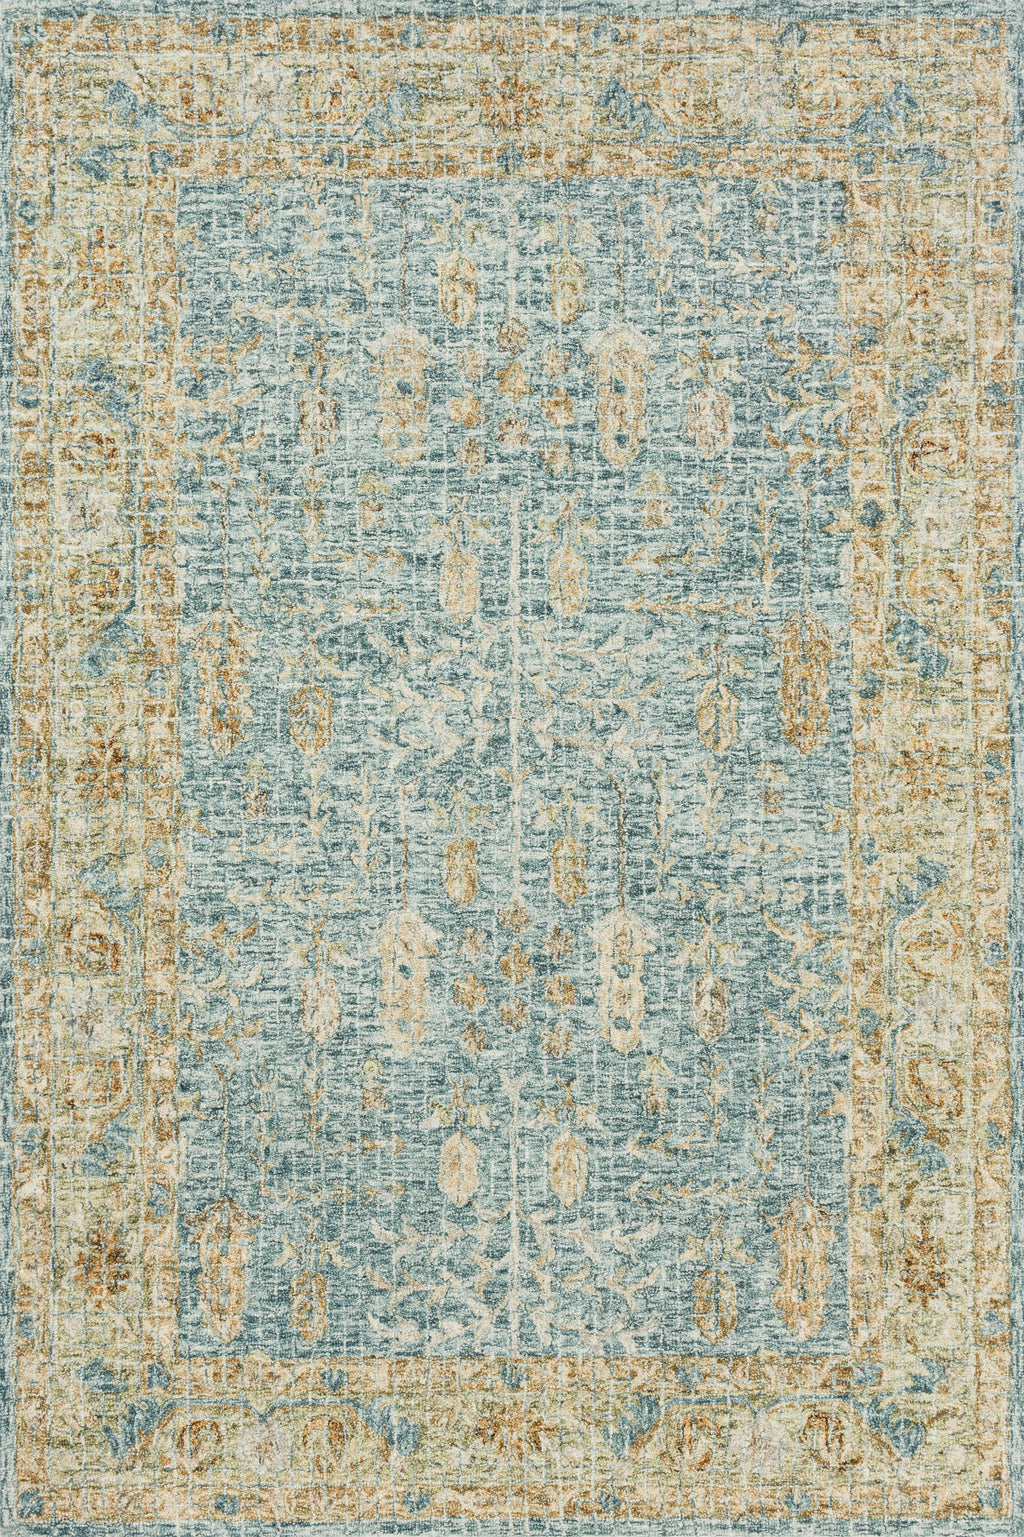 JULIAN Collection Wool Rug  in  BLUE / GOLD Blue Runner Hand-Hooked Wool